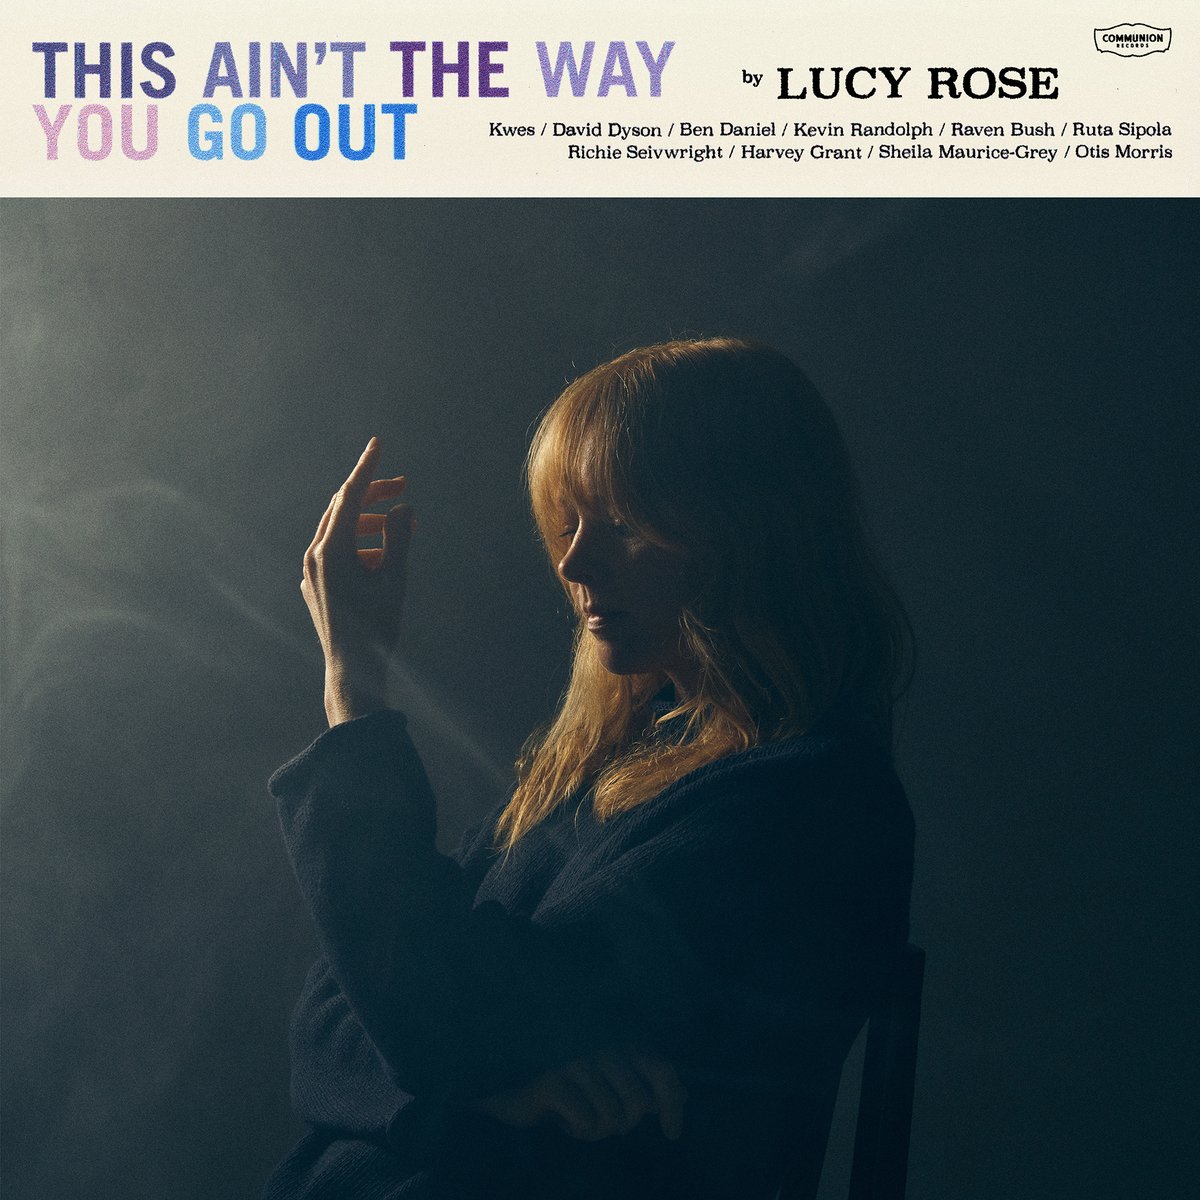 Communion Records | @lucyrosemusic's new album 'This Ain't The Way You Go Out' is out now. lucyrose.lnk.to/tatwygo